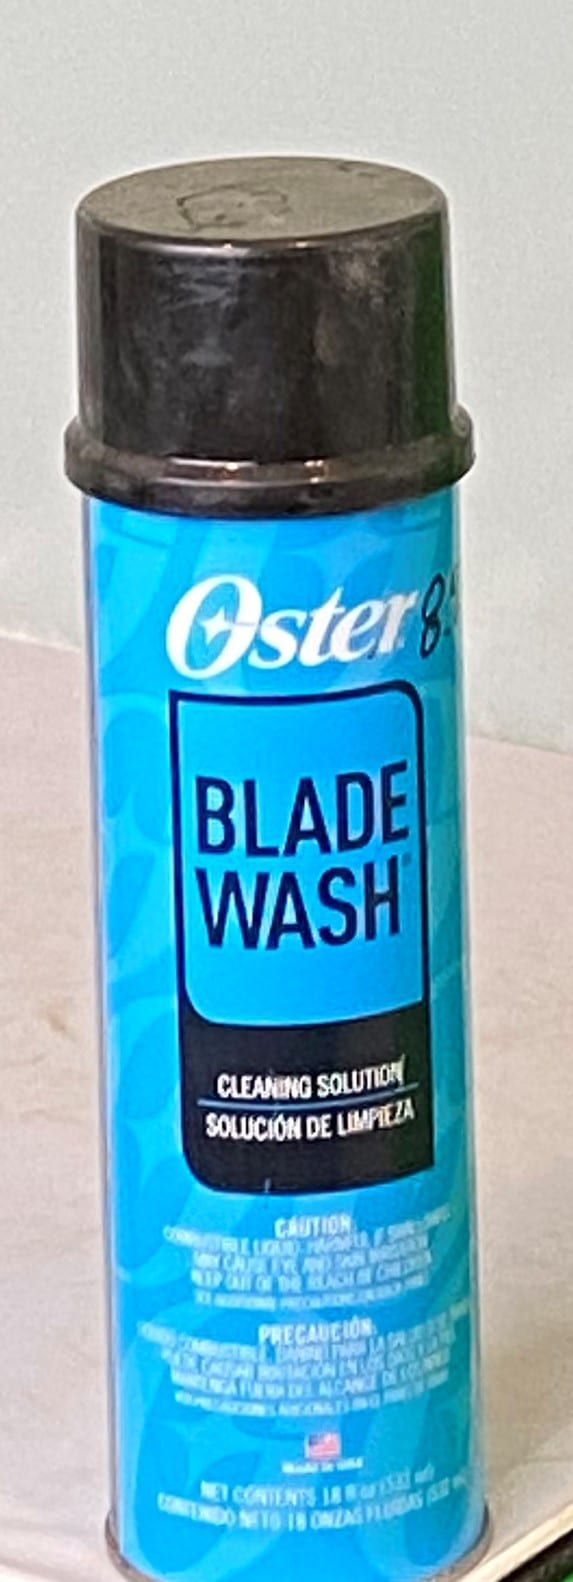 Oster Blade Wash, 18-Ounces